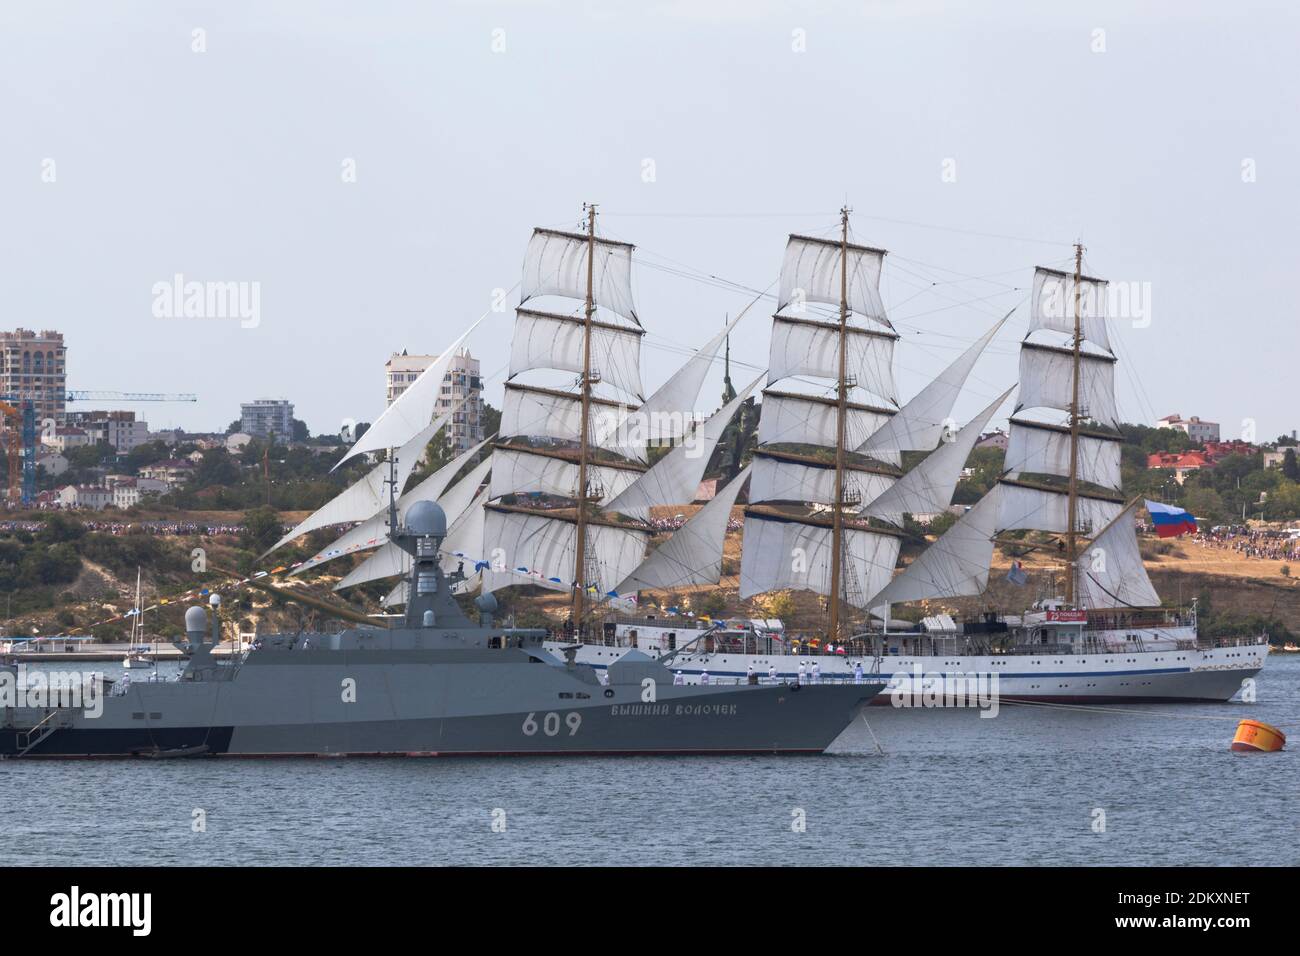 Sevastopol, Crimea, Russia - July 26, 2020: Sailboat Chersonesos passes next to the small missile ship Vyshny Volochek at the parade in honor of the N Stock Photo